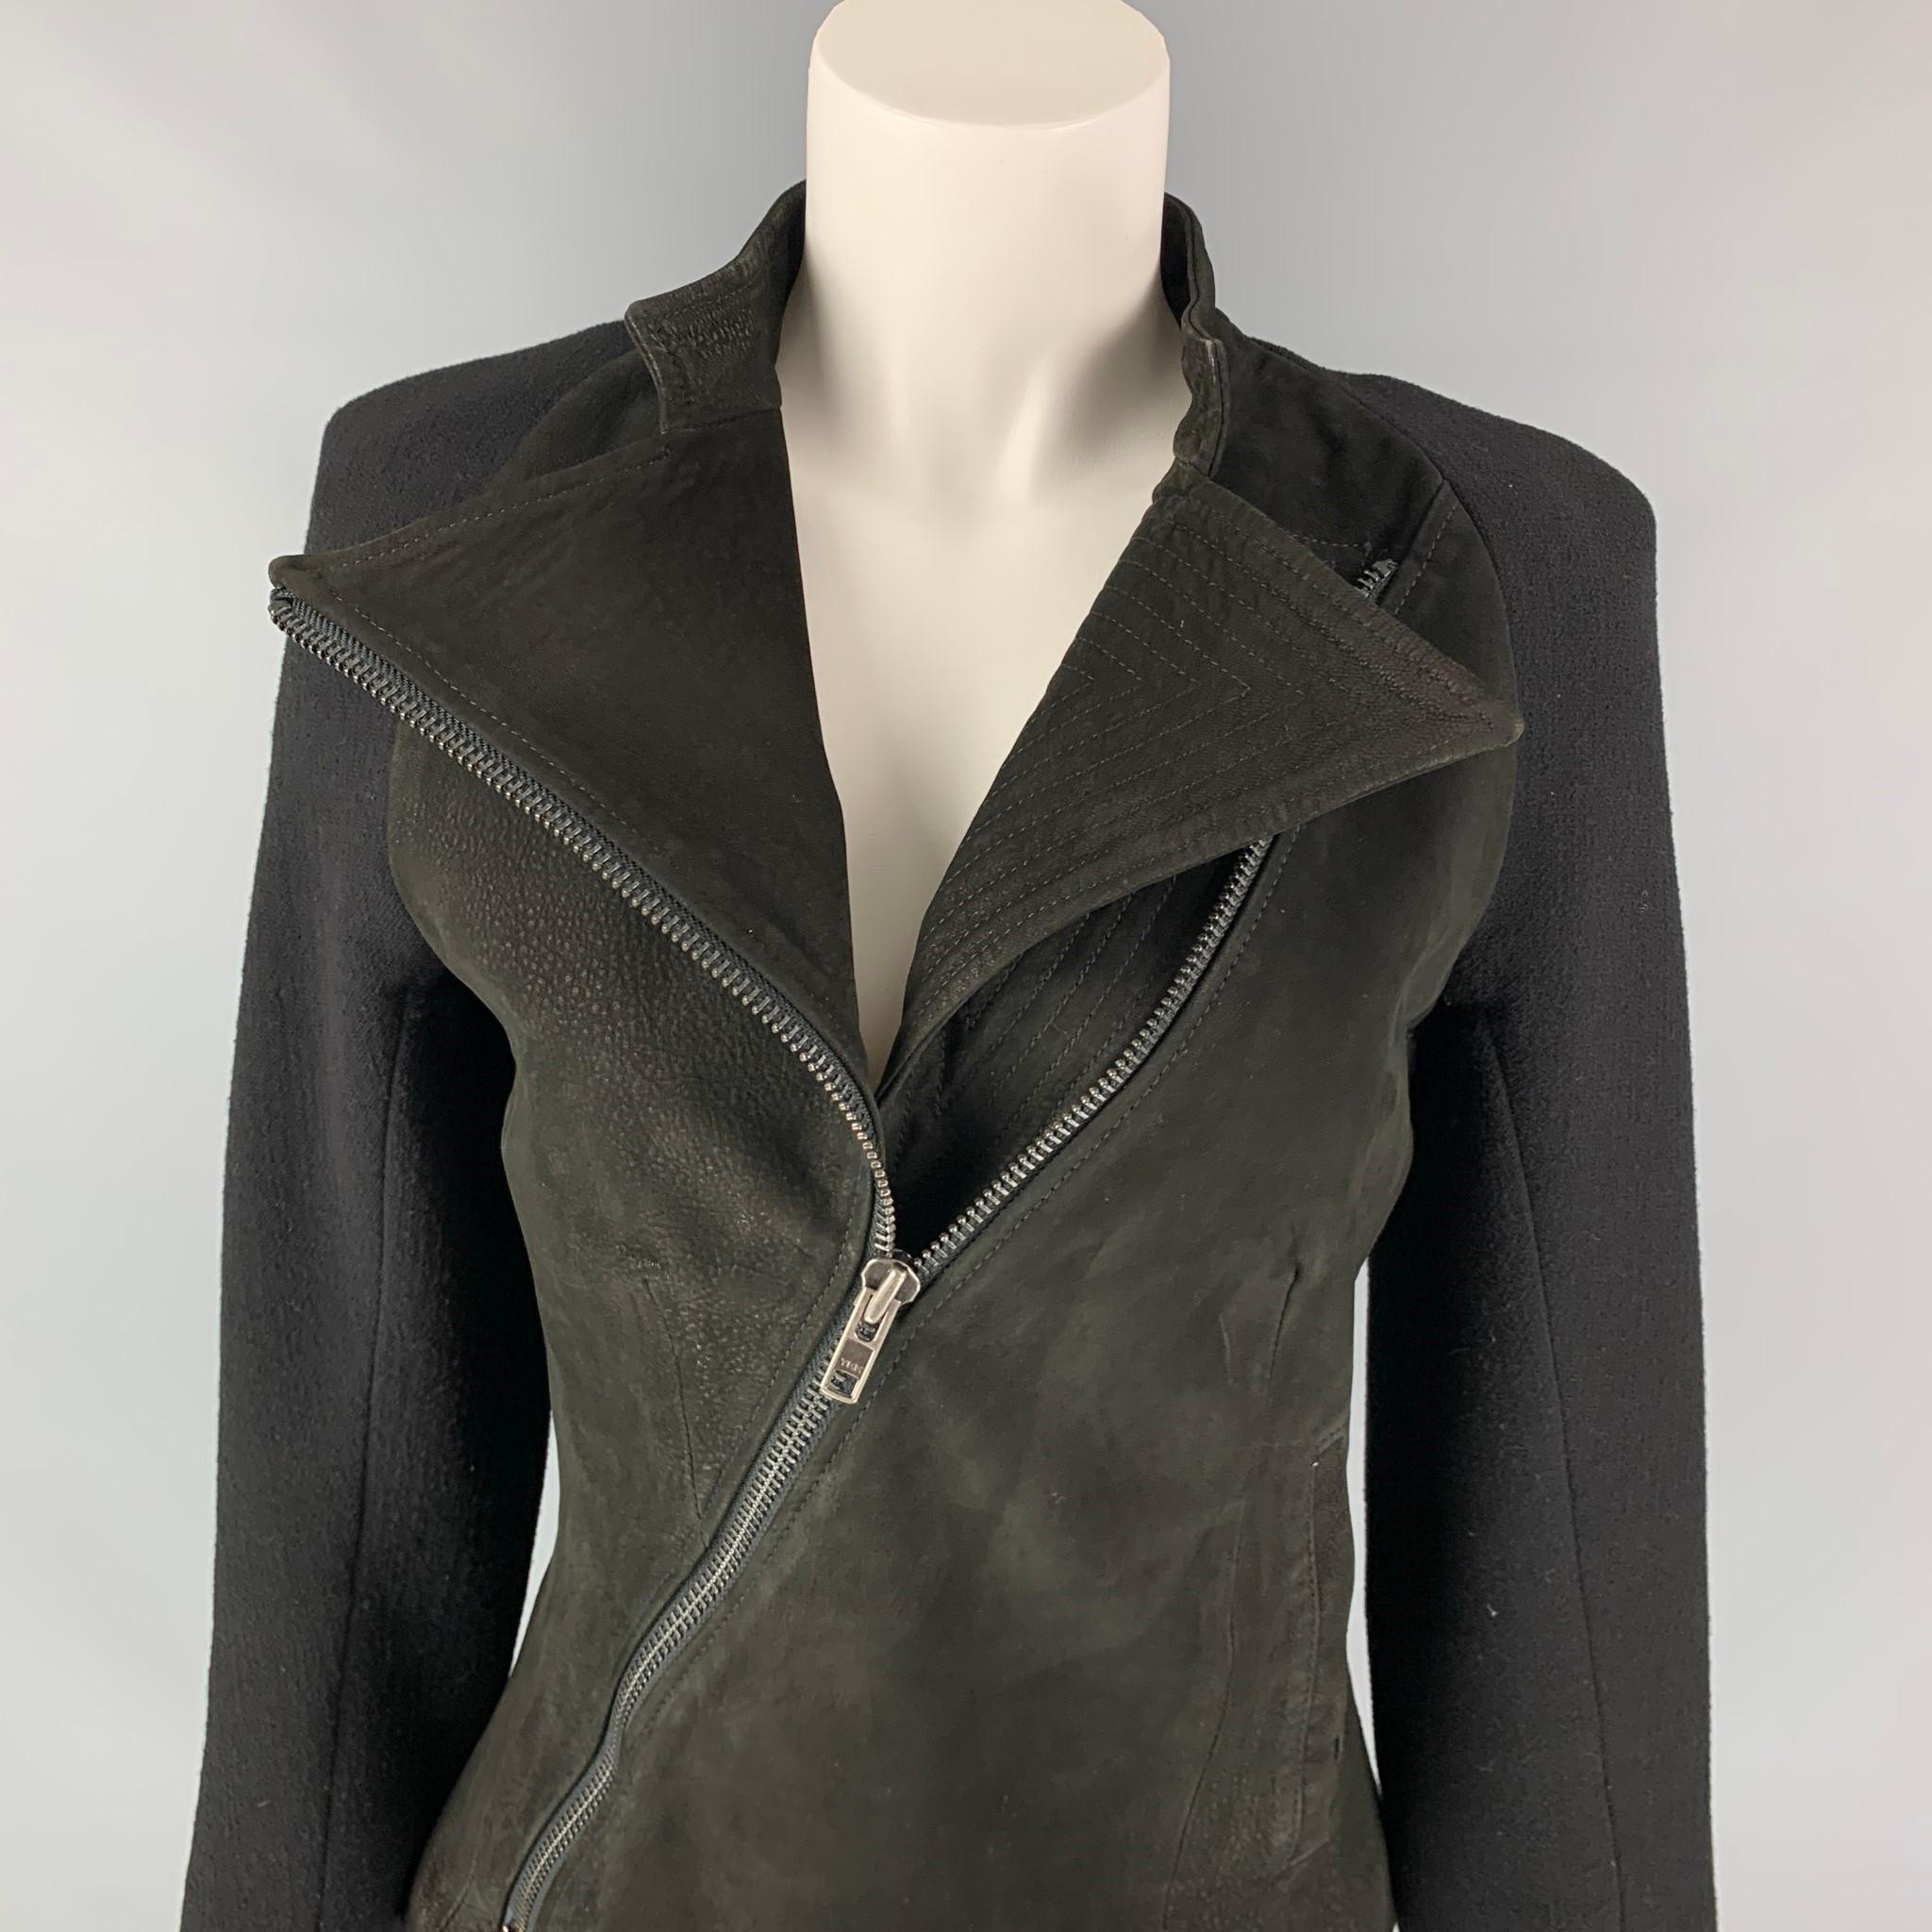 HAIDER ACKERMANN jacket comes in a black virgin wool with a suede panel design featuring a full liner, slit pockets, stand up collar, and a asymmetrical zip up closure. Made in Italy.

Very Good Pre-Owned Condition.
Marked: